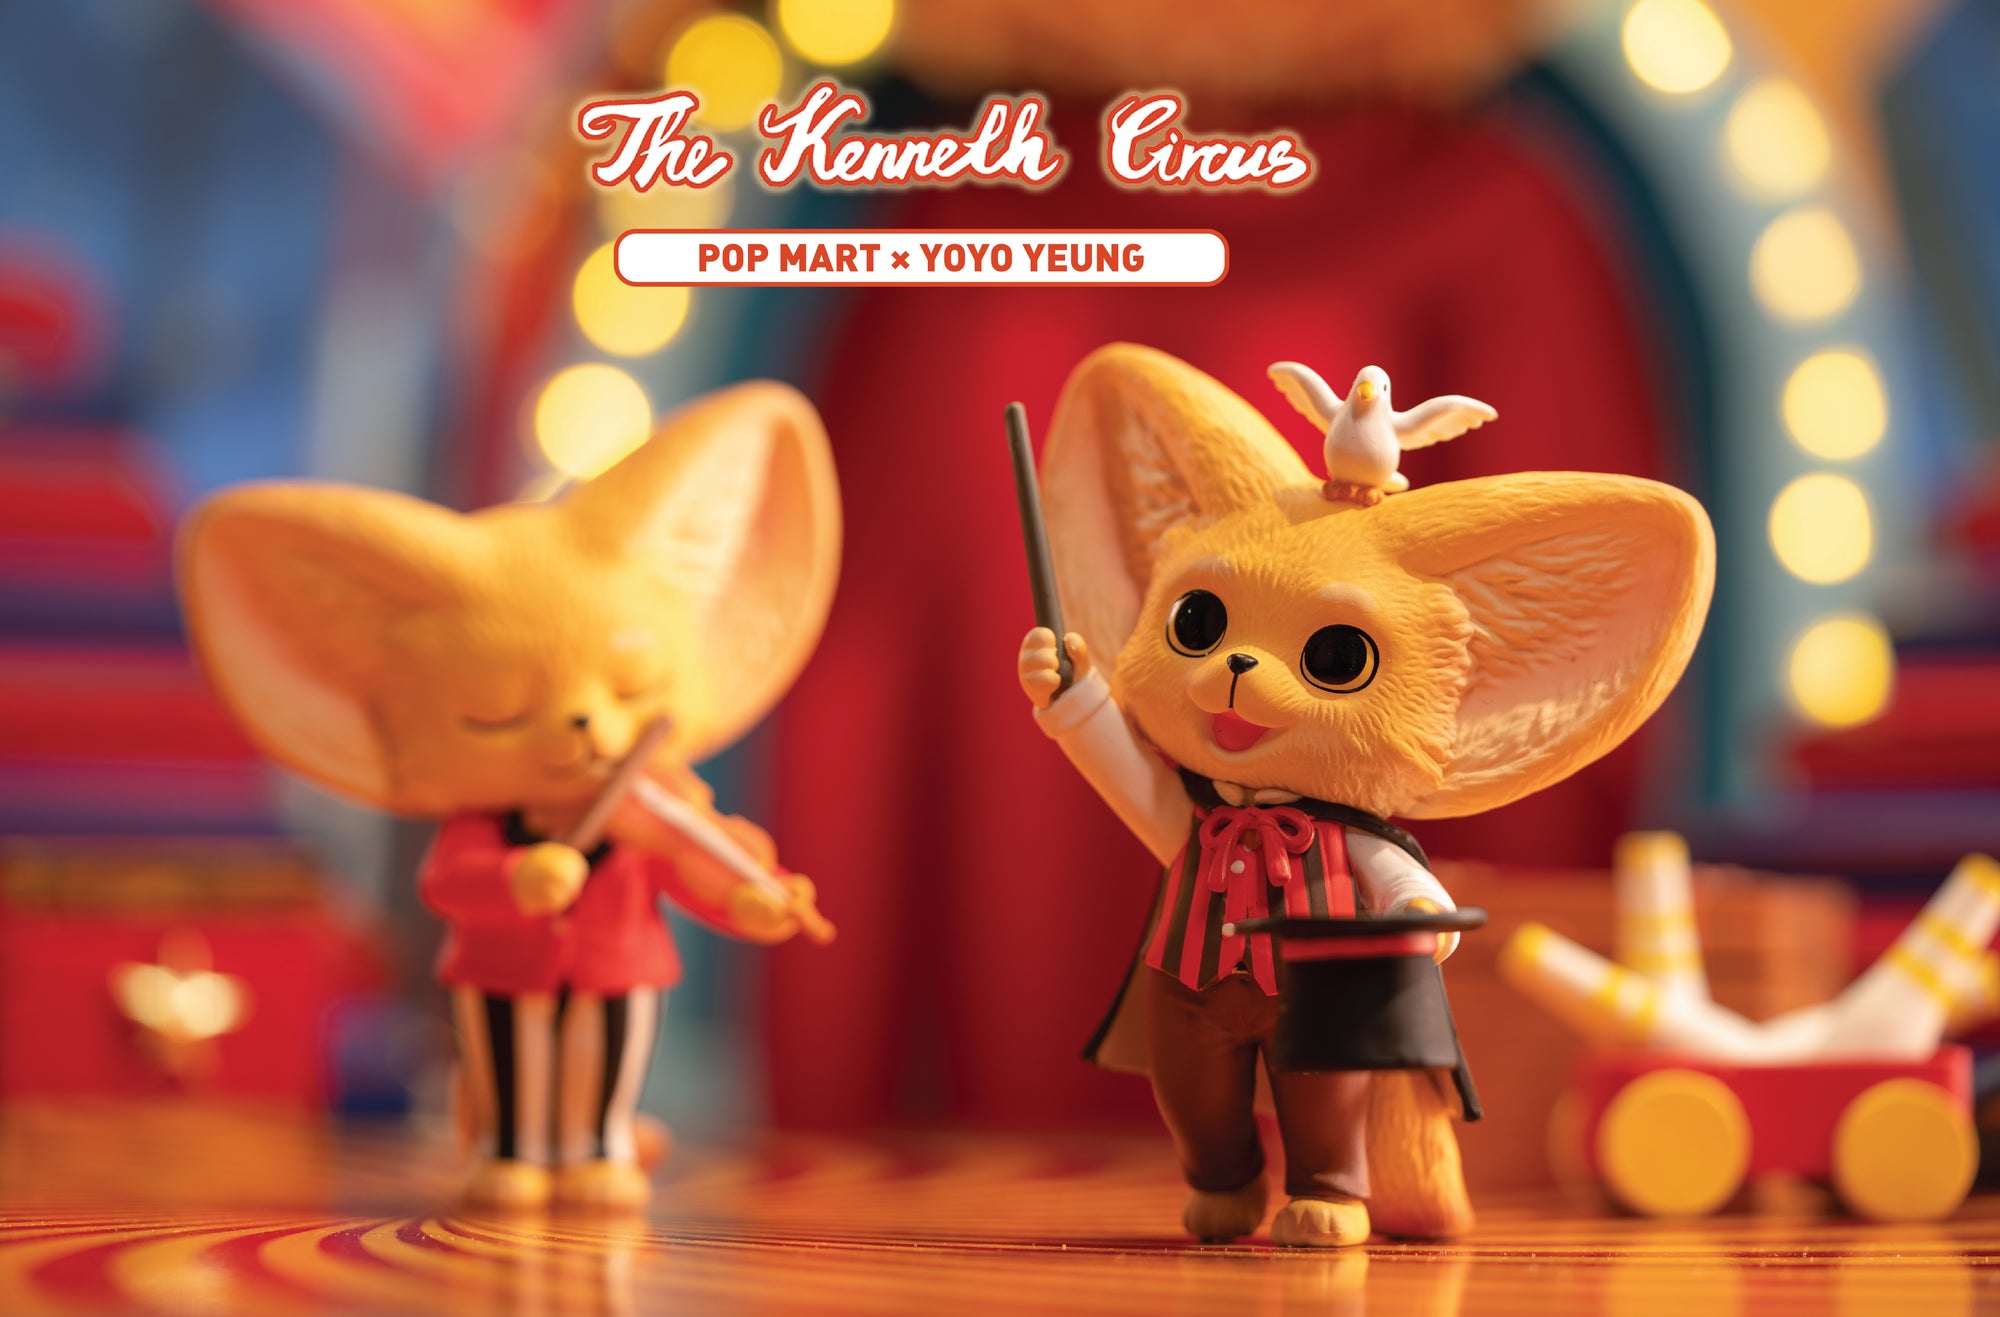 Kenneth Circus Blind Box Series by Yoyo Yeung x POP MART